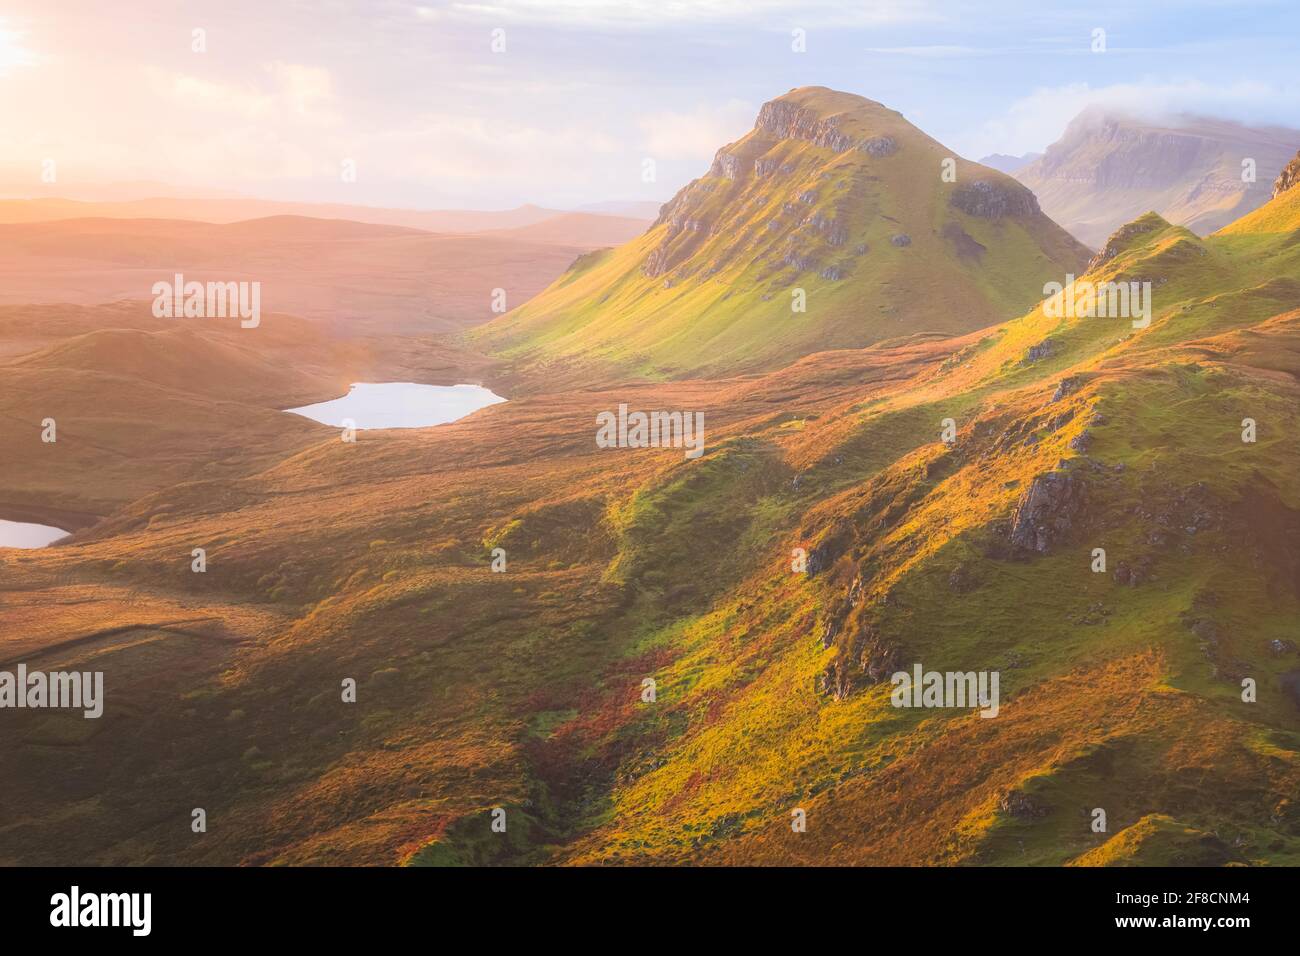 Vibrant golden light over epic mountain landscape of the rugged, contoured terrain of the Cleat at the Quiraing on the Isle of Skye, Scotland. Stock Photo